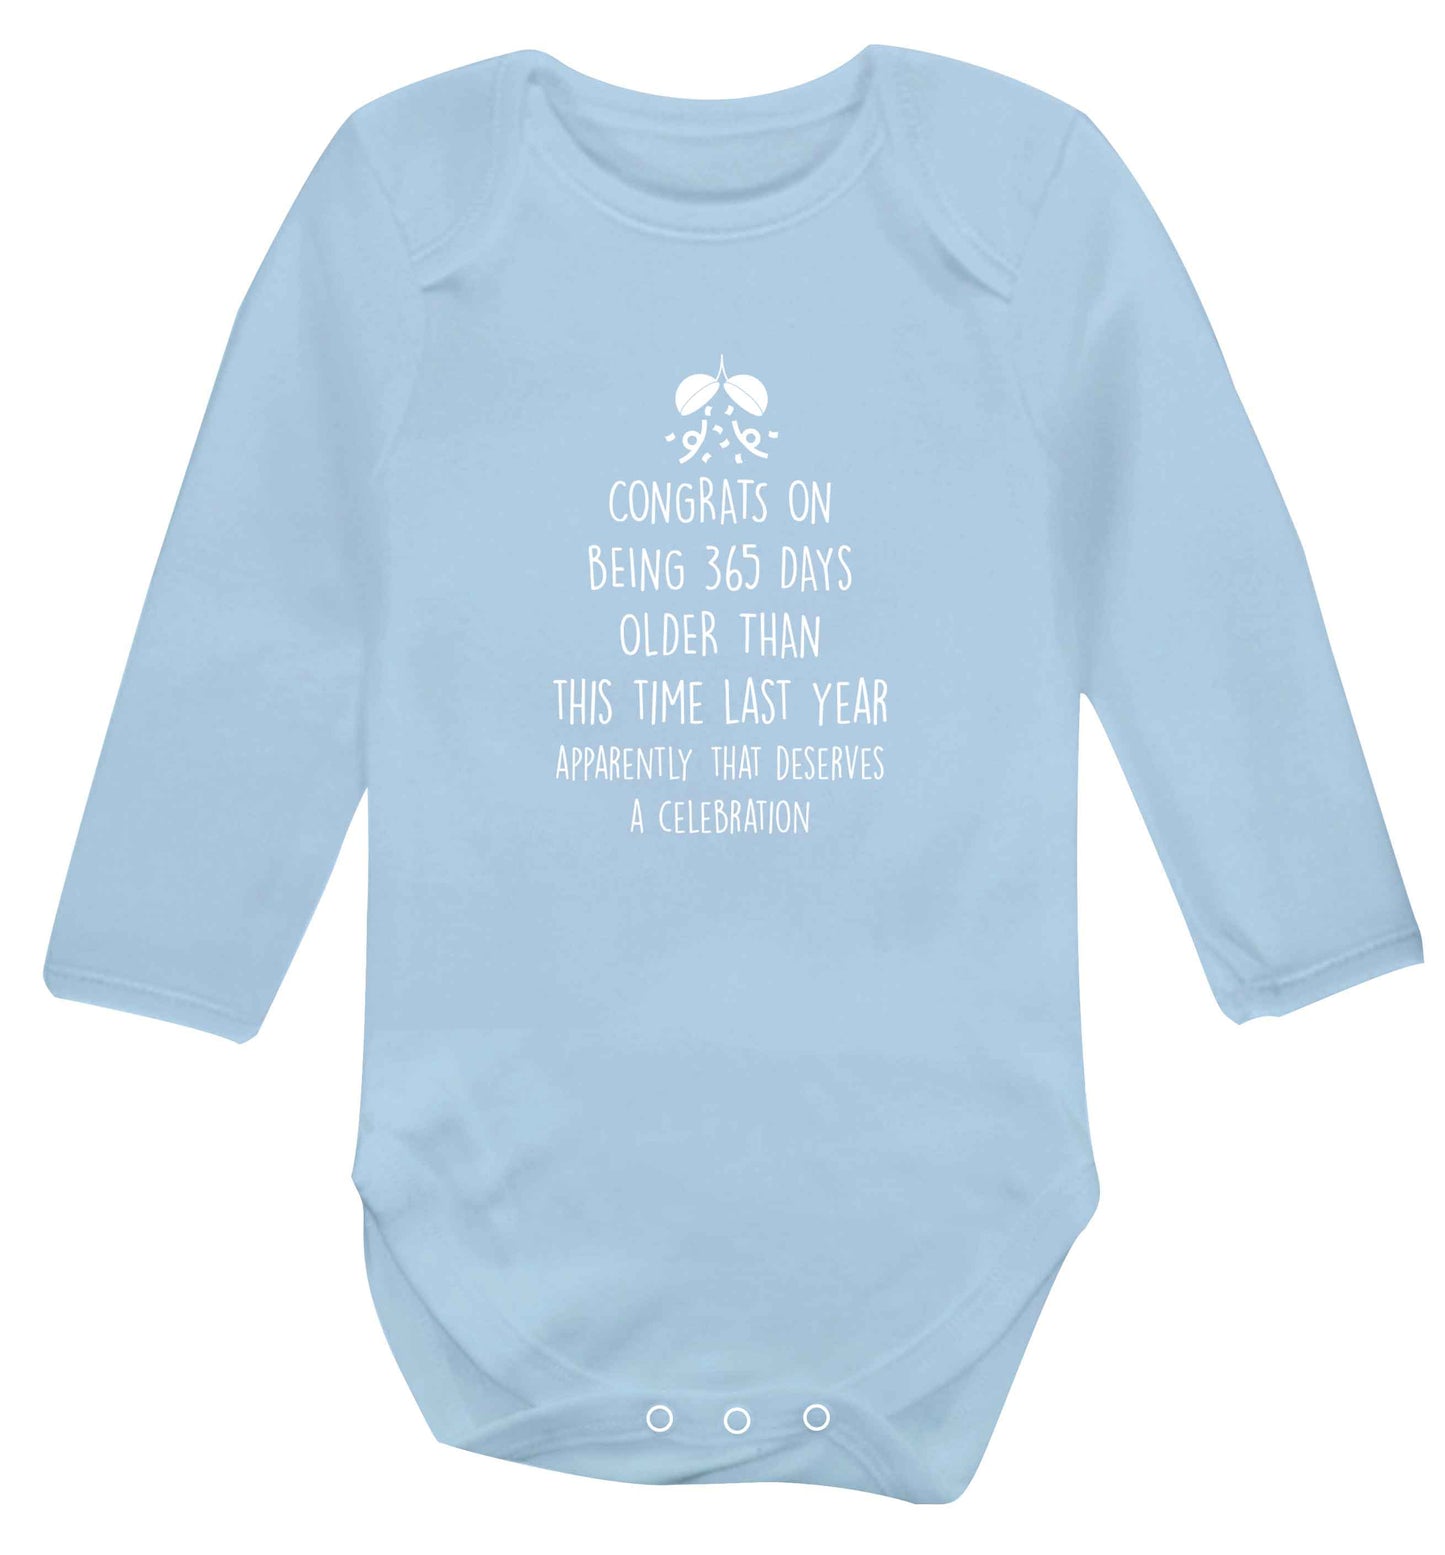 Congrats on being 365 days older than you were this time last year apparently that deserves a celebration baby vest long sleeved pale blue 6-12 months